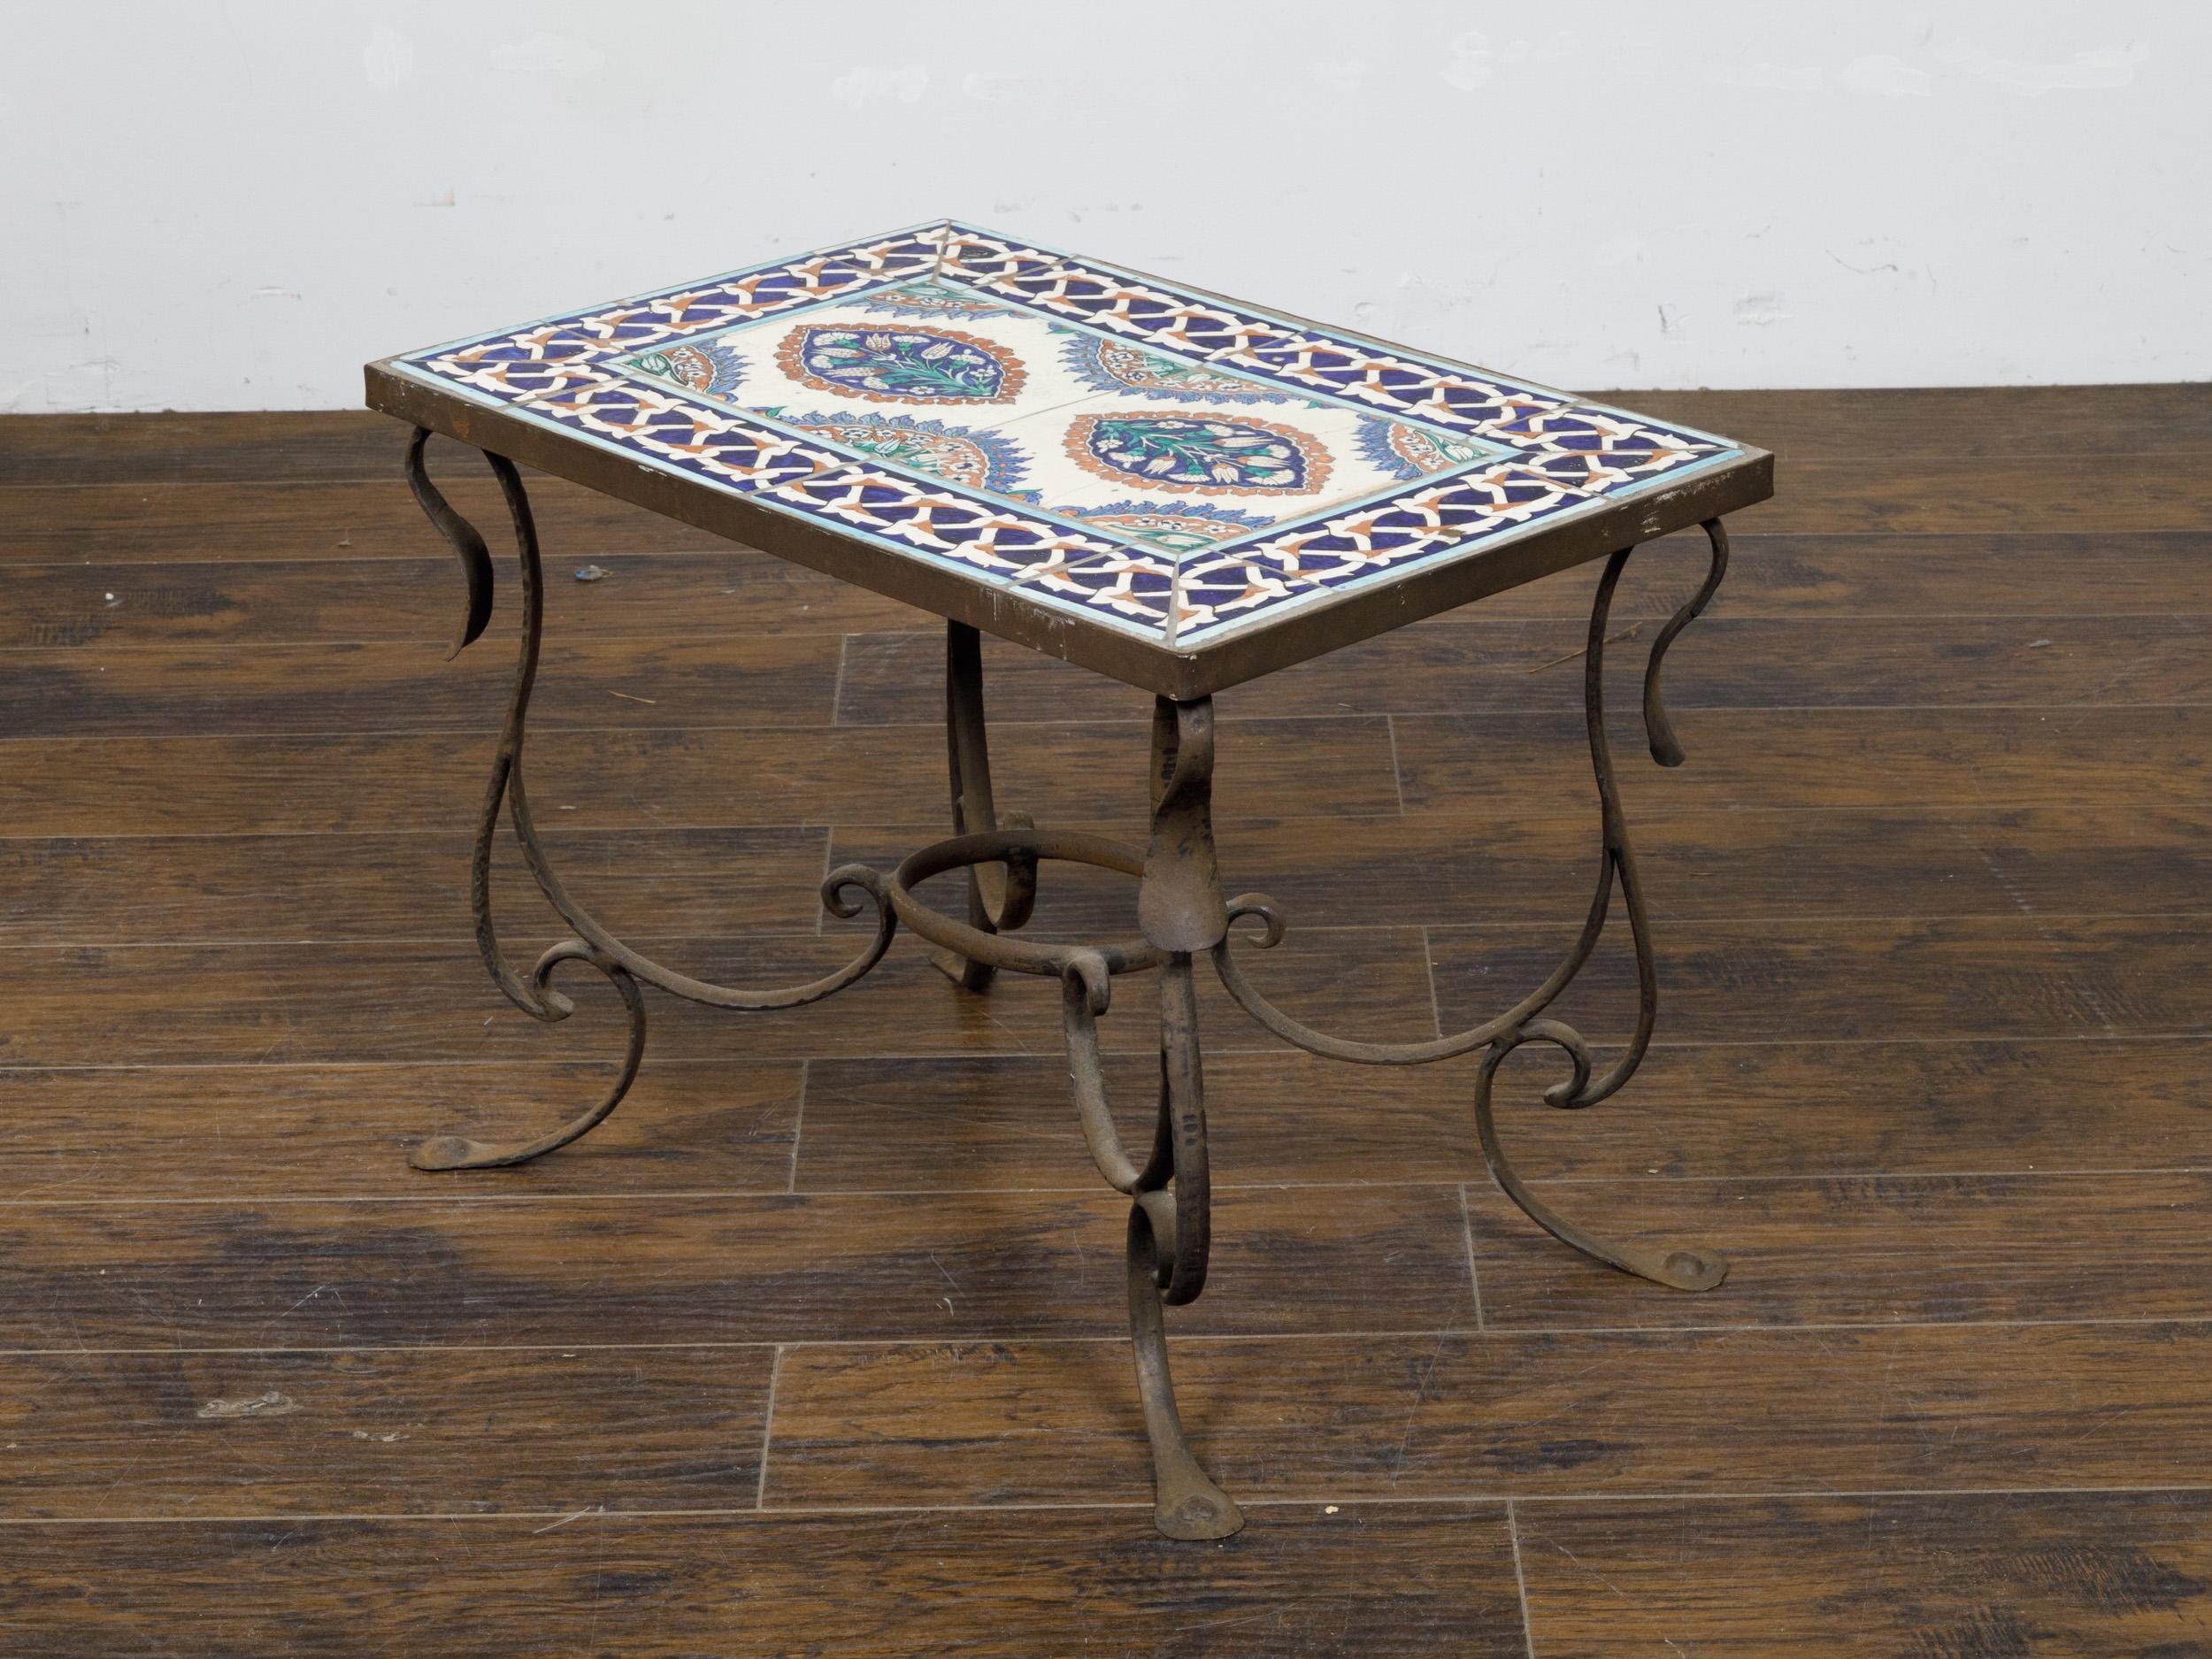 An Italian wrought-iron coffee table from the Midcentury period, with tile top and scrolling base. This Italian Midcentury wrought-iron coffee table presents a delightful amalgamation of classic design and vibrant aesthetics, making it a striking